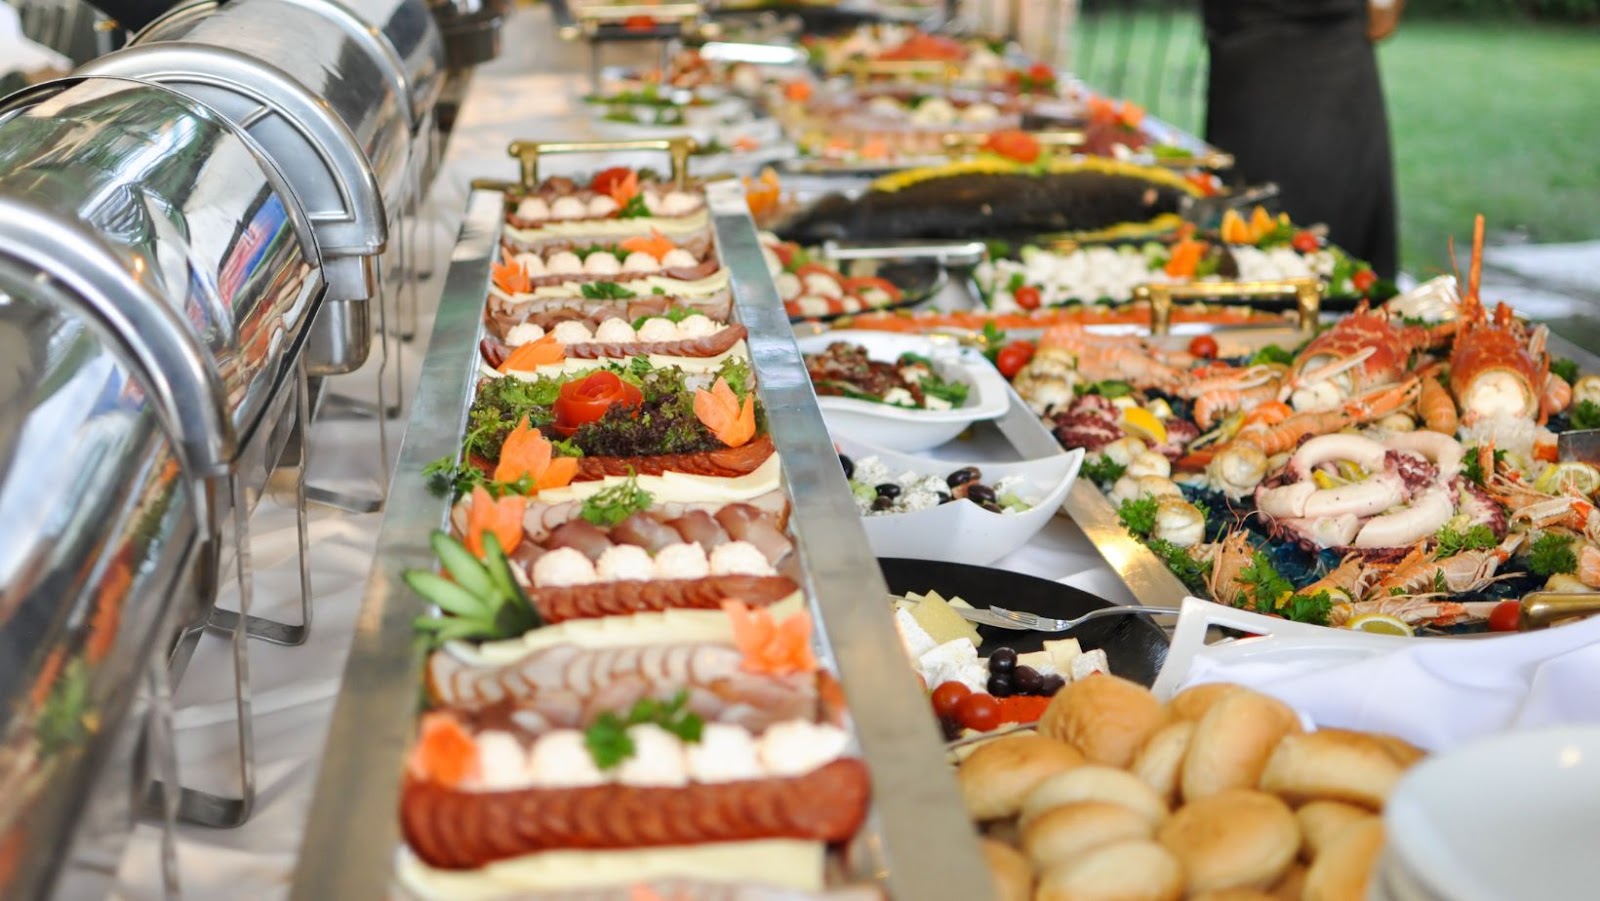 10 First-Class Food Catering Services in Singapore